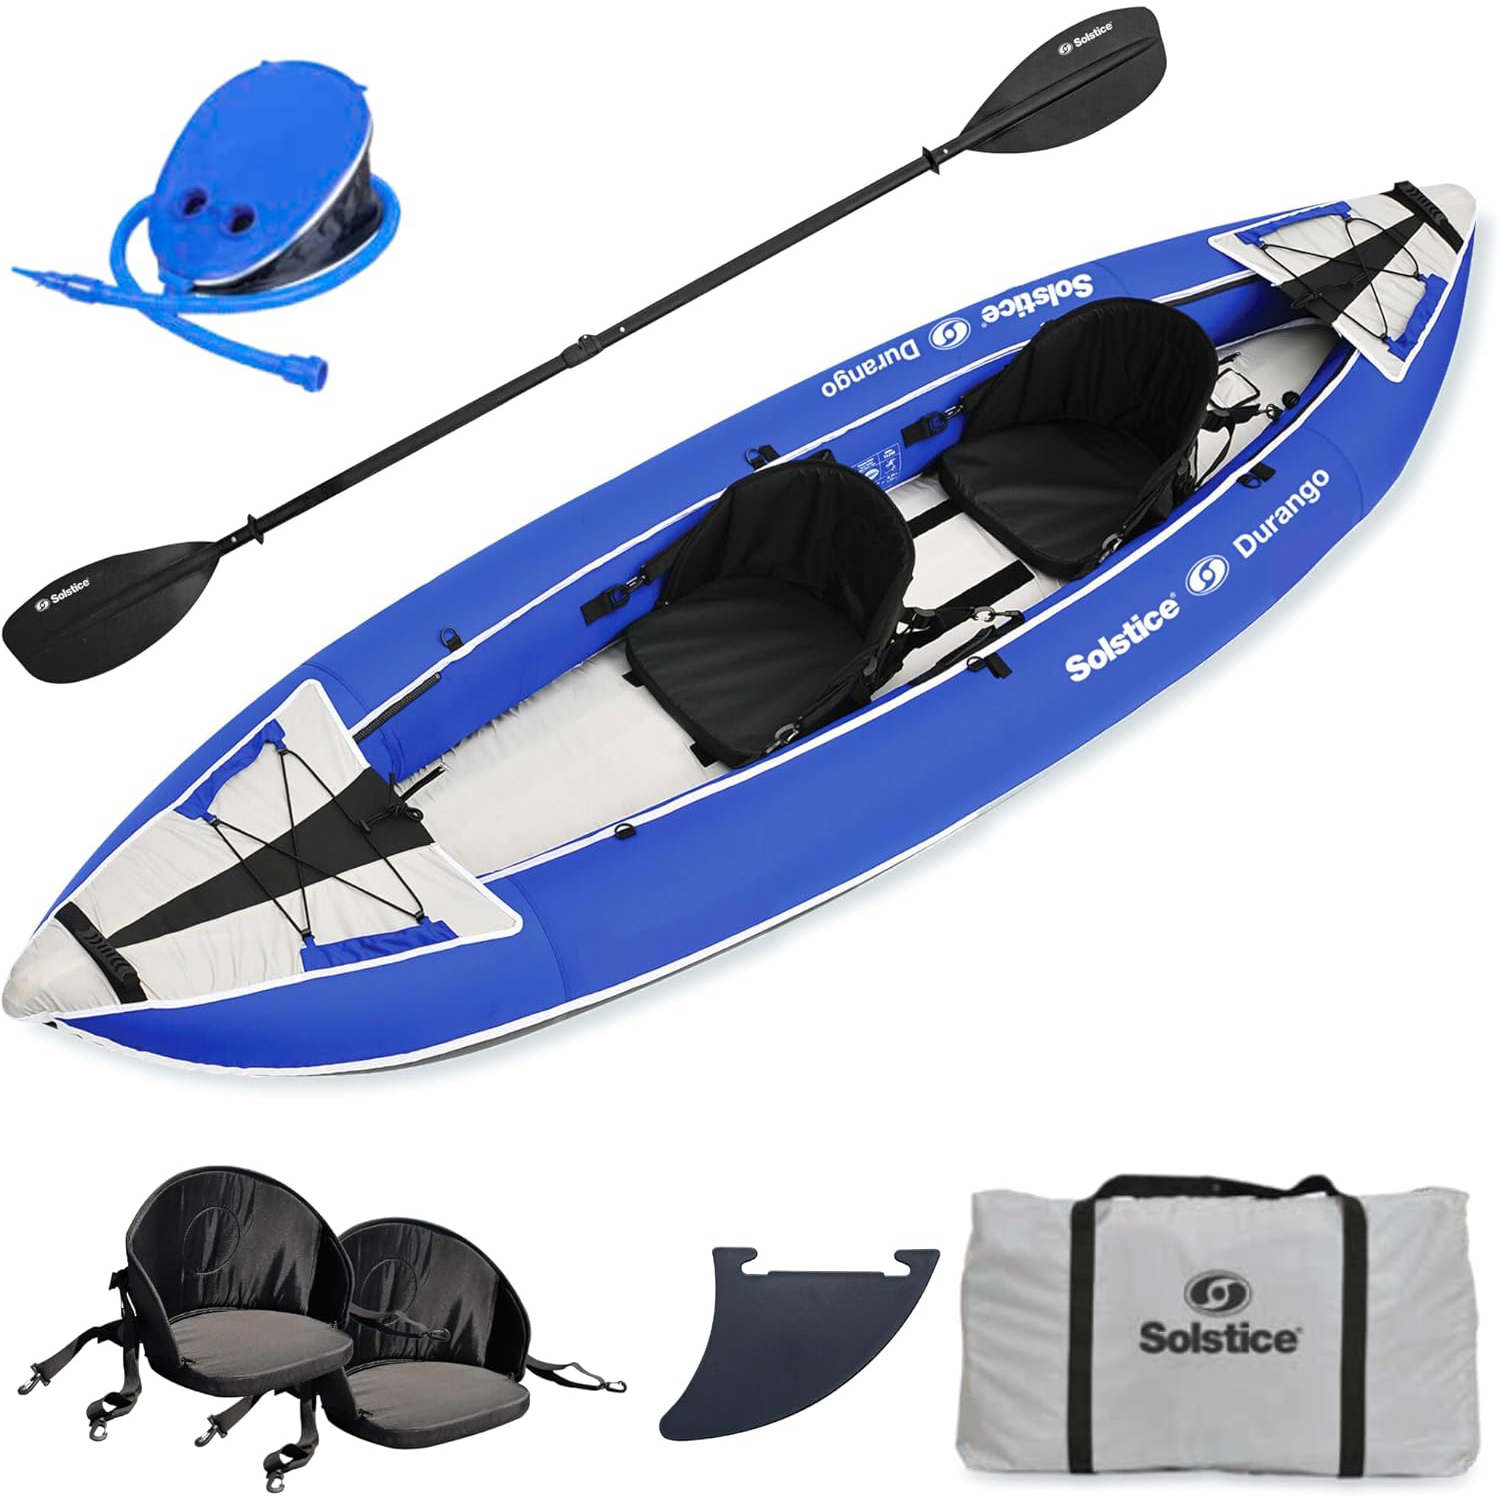 SOLSTICE Inflatable Kayak Boat Series for Adults & Kids 1 to 2 Person Tandem Raft Options 